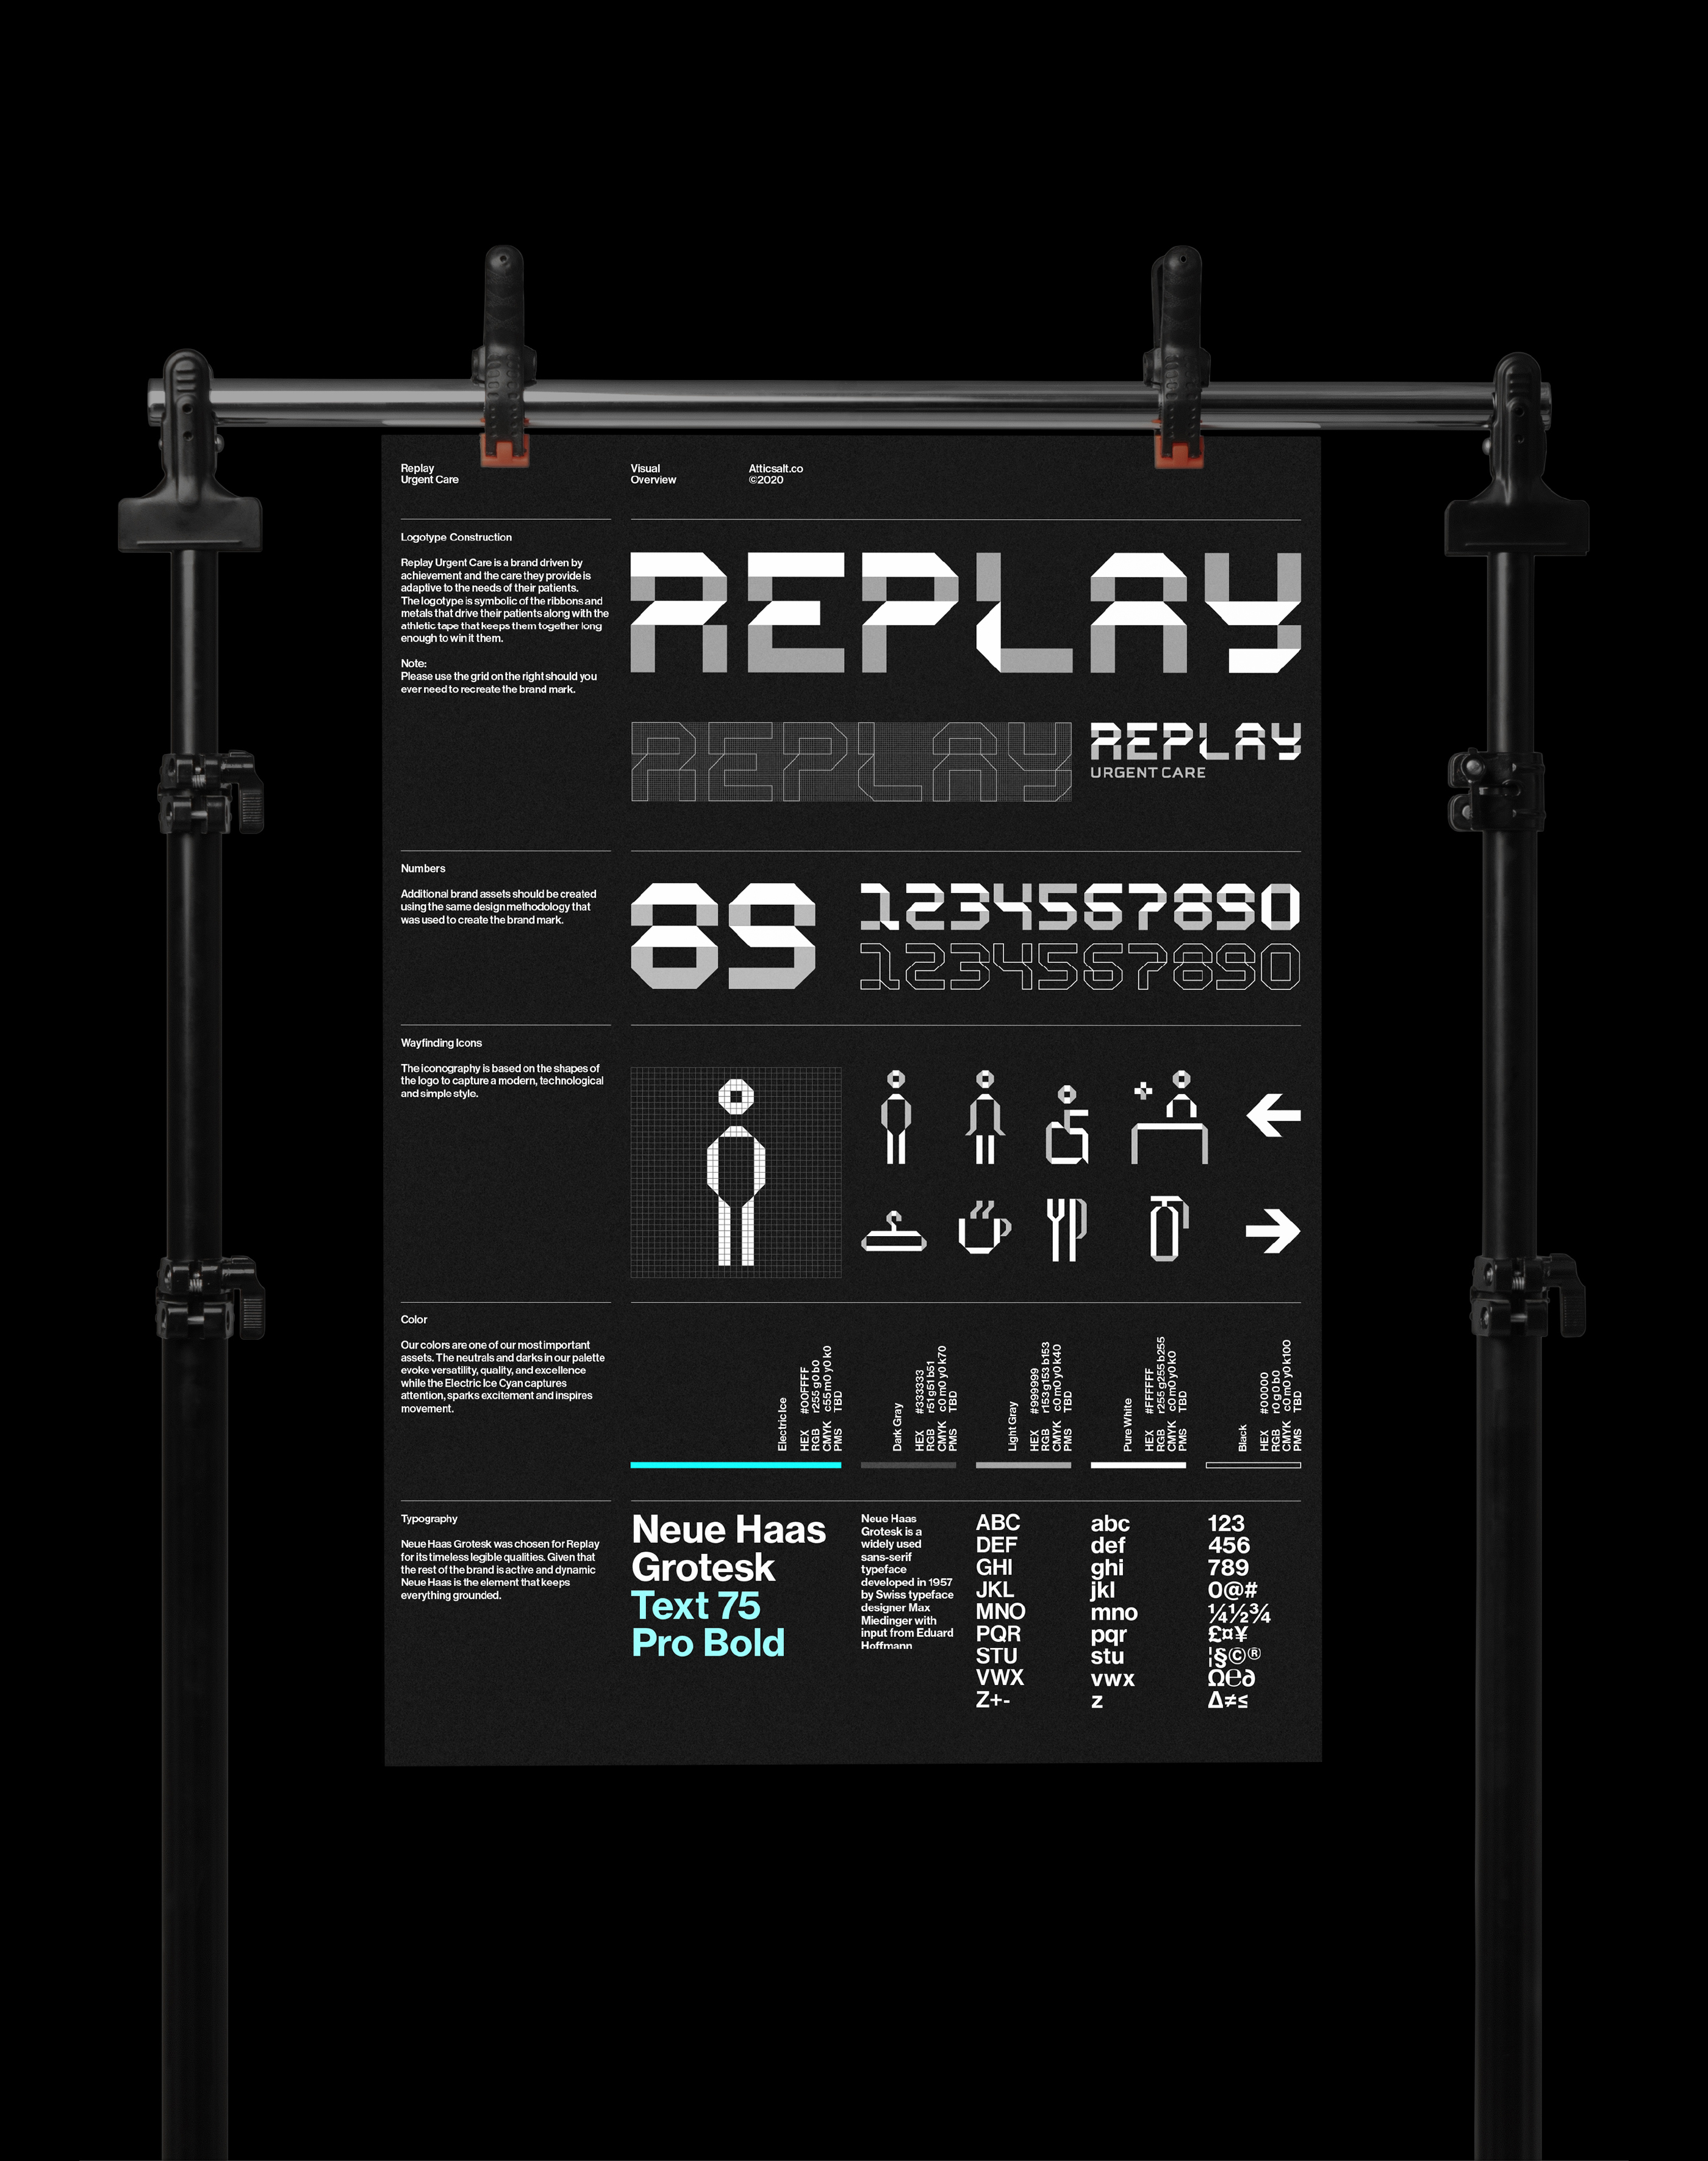 featured image two:Replay Urgent Care: A medical brand that takes the gold.